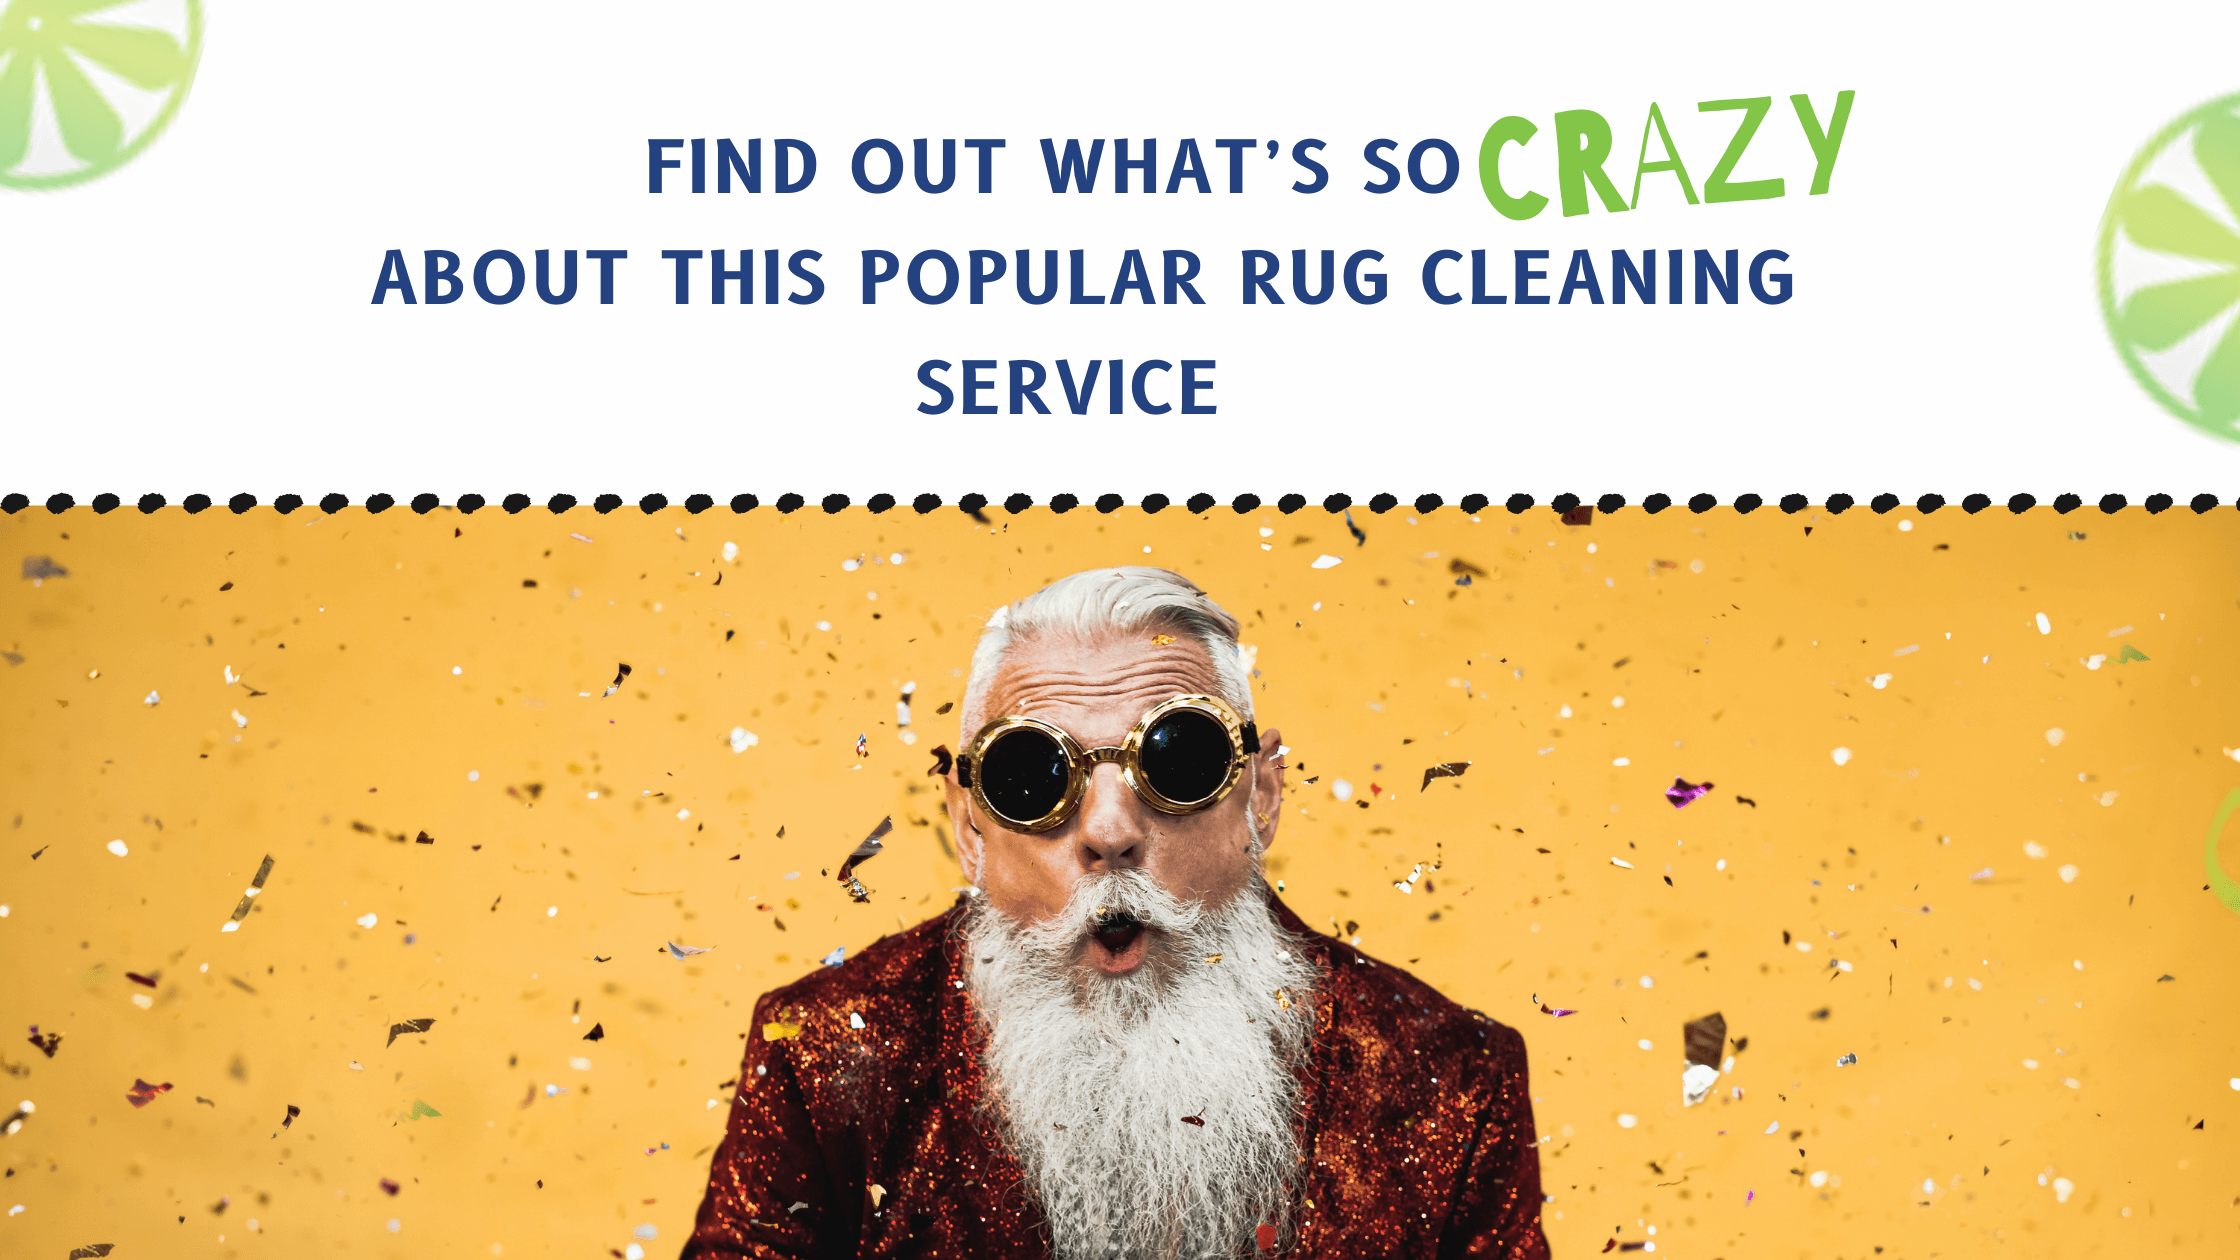 Find out what's so CRAZY about this popular rug cleaning service. 1